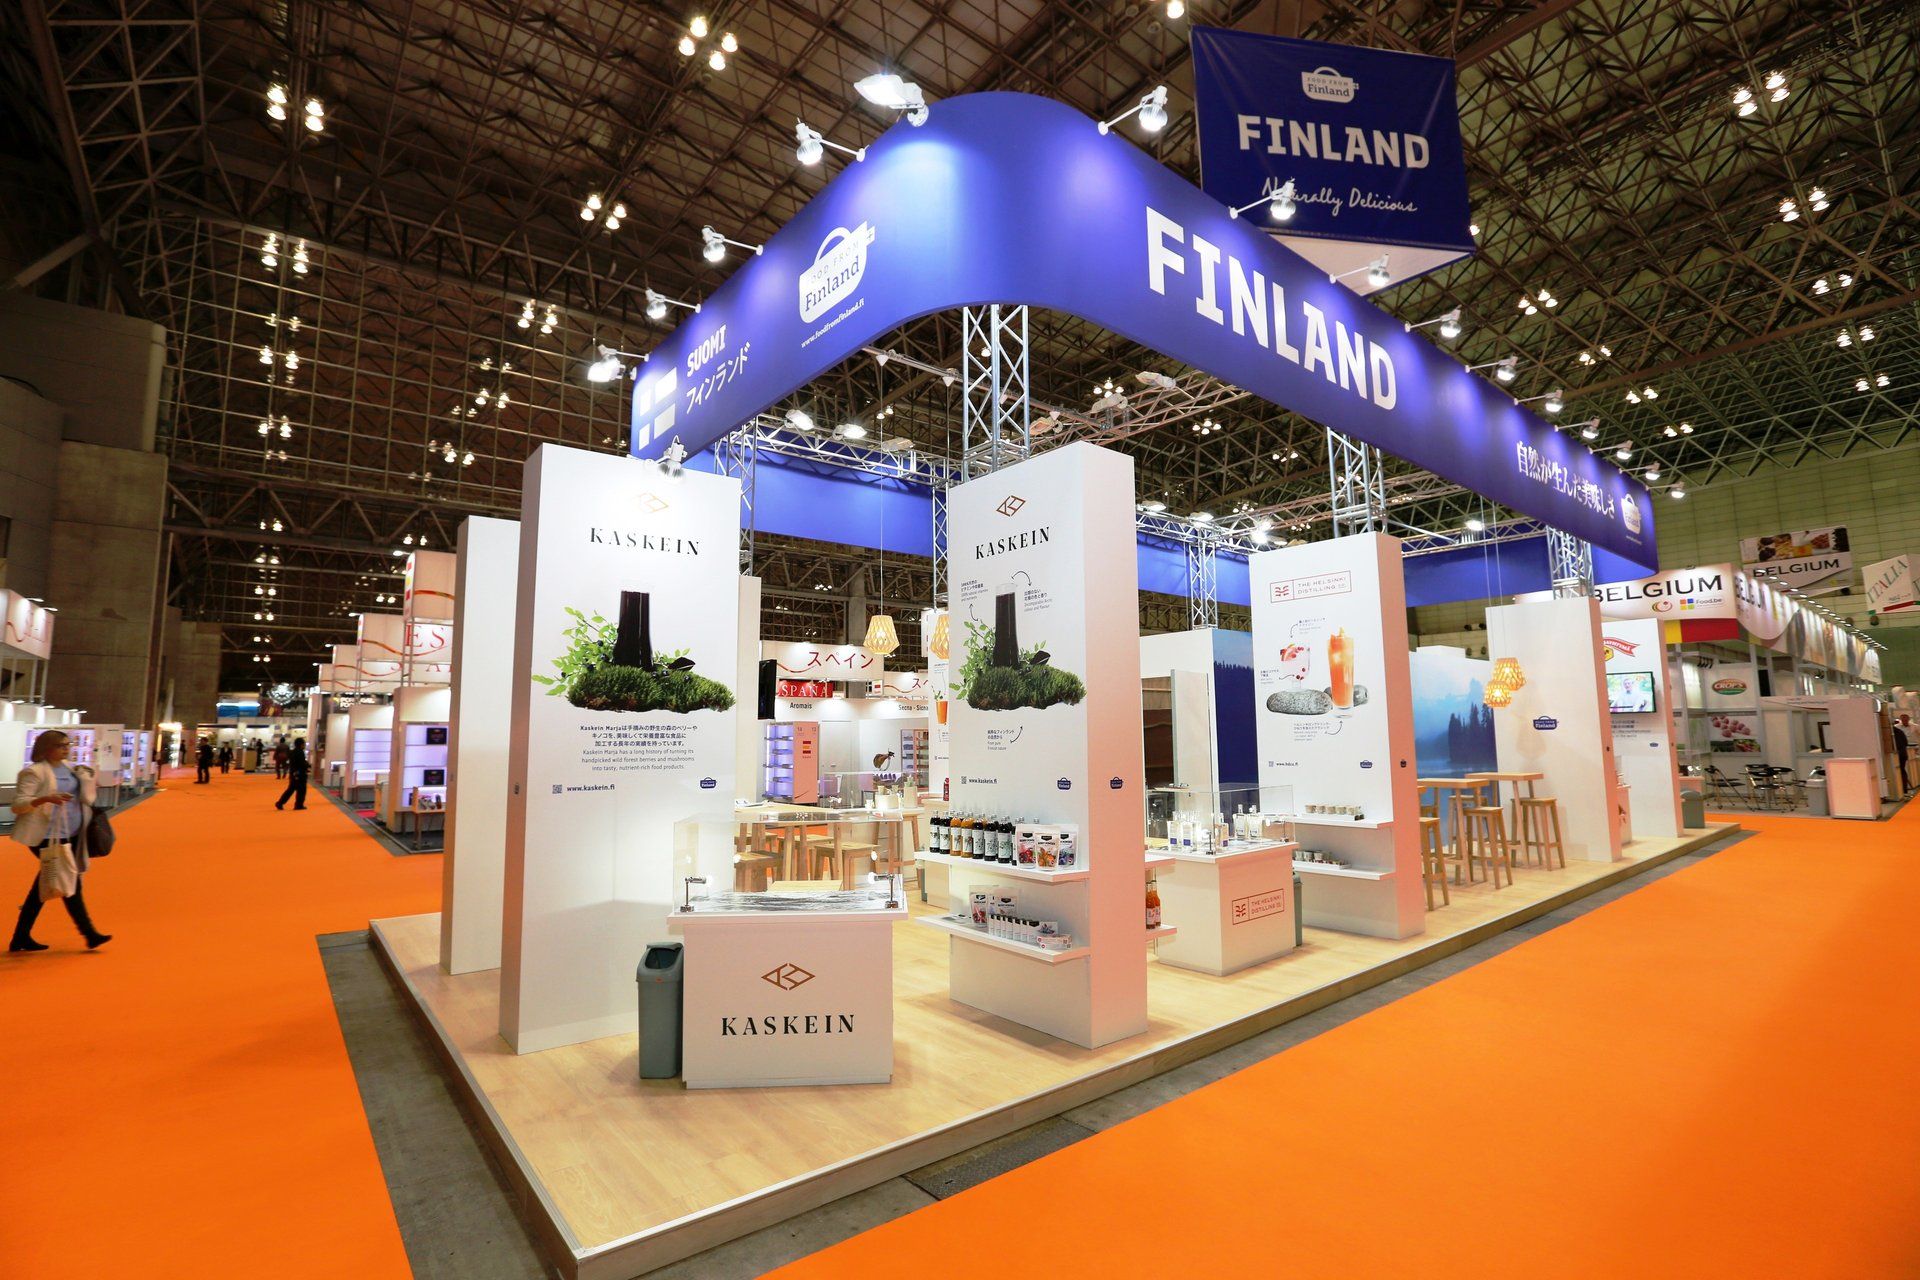 Finland Pavilion@ Foodex Japan 2016. Booth designed and built by Essential Global Fairs.